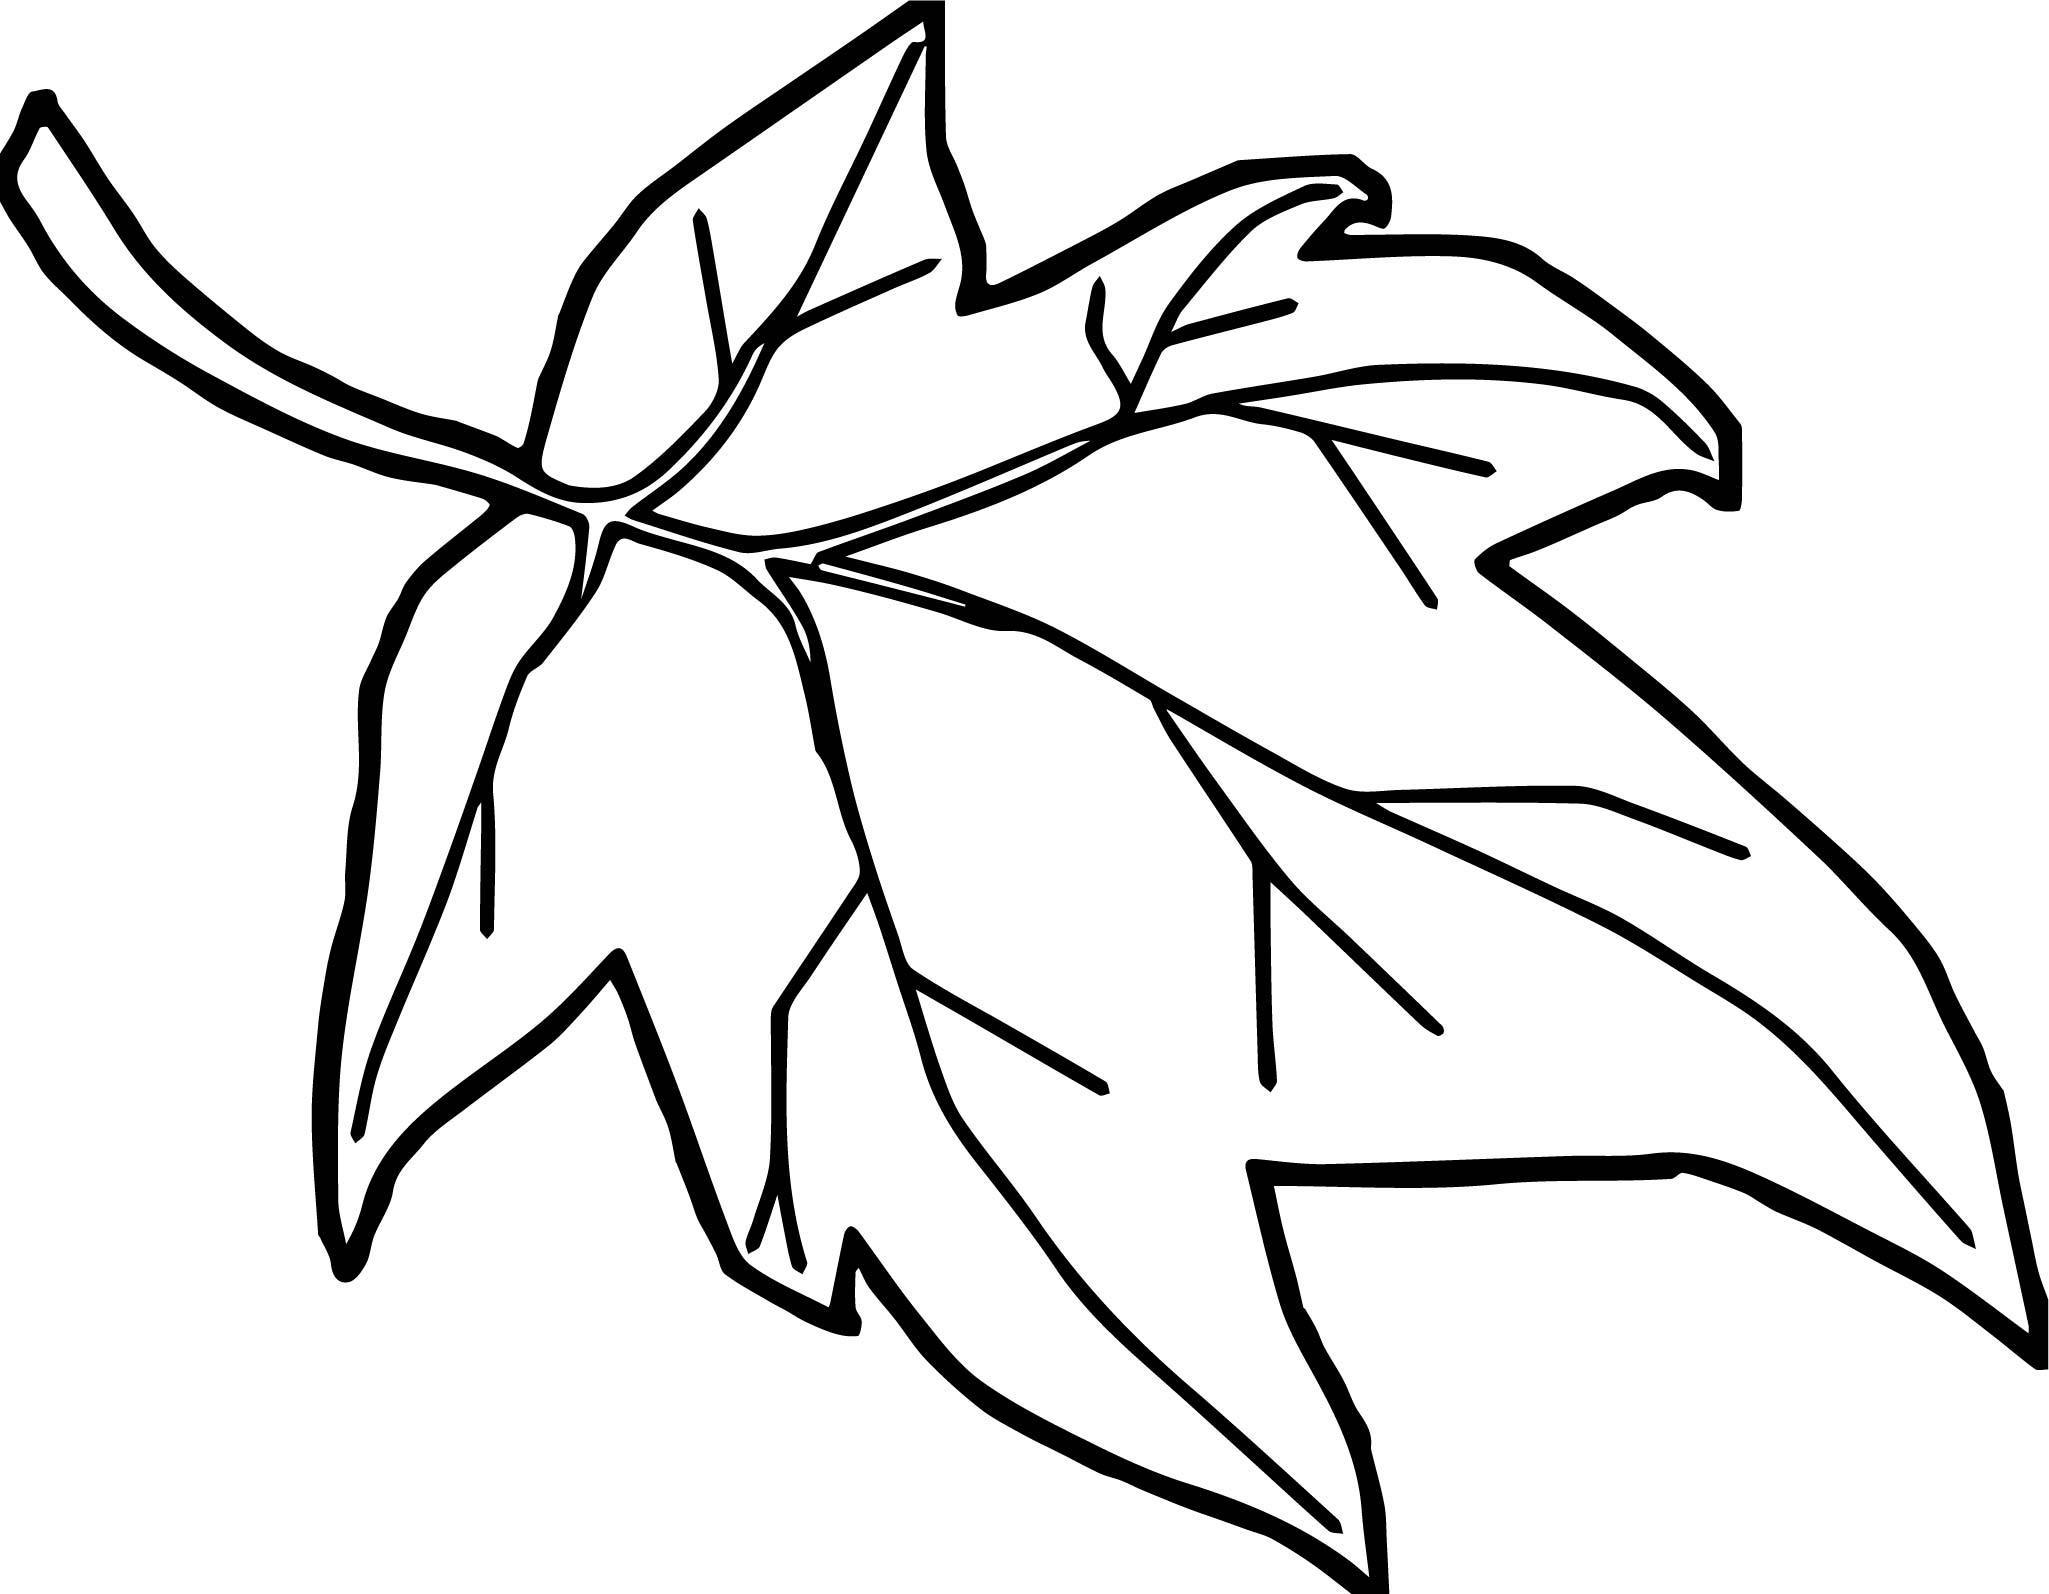 Maple Leaf Coloring Page at GetColorings.com | Free printable colorings